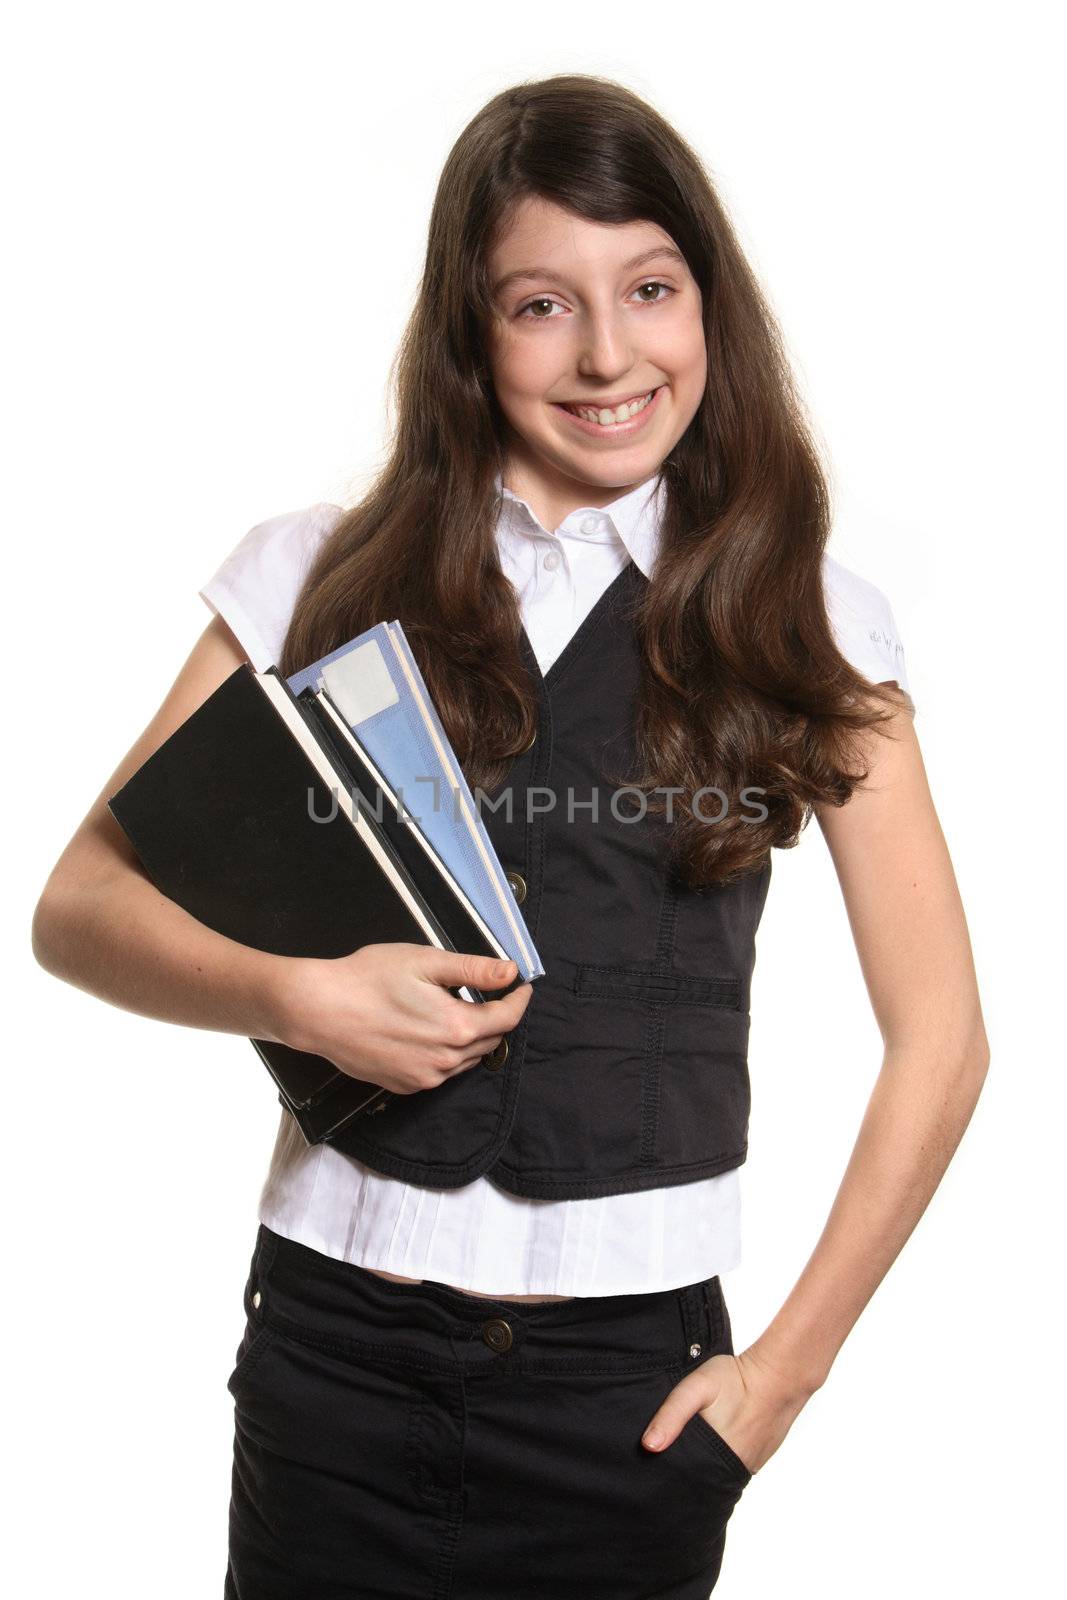 The schoolgirl holds books and looks in a camera